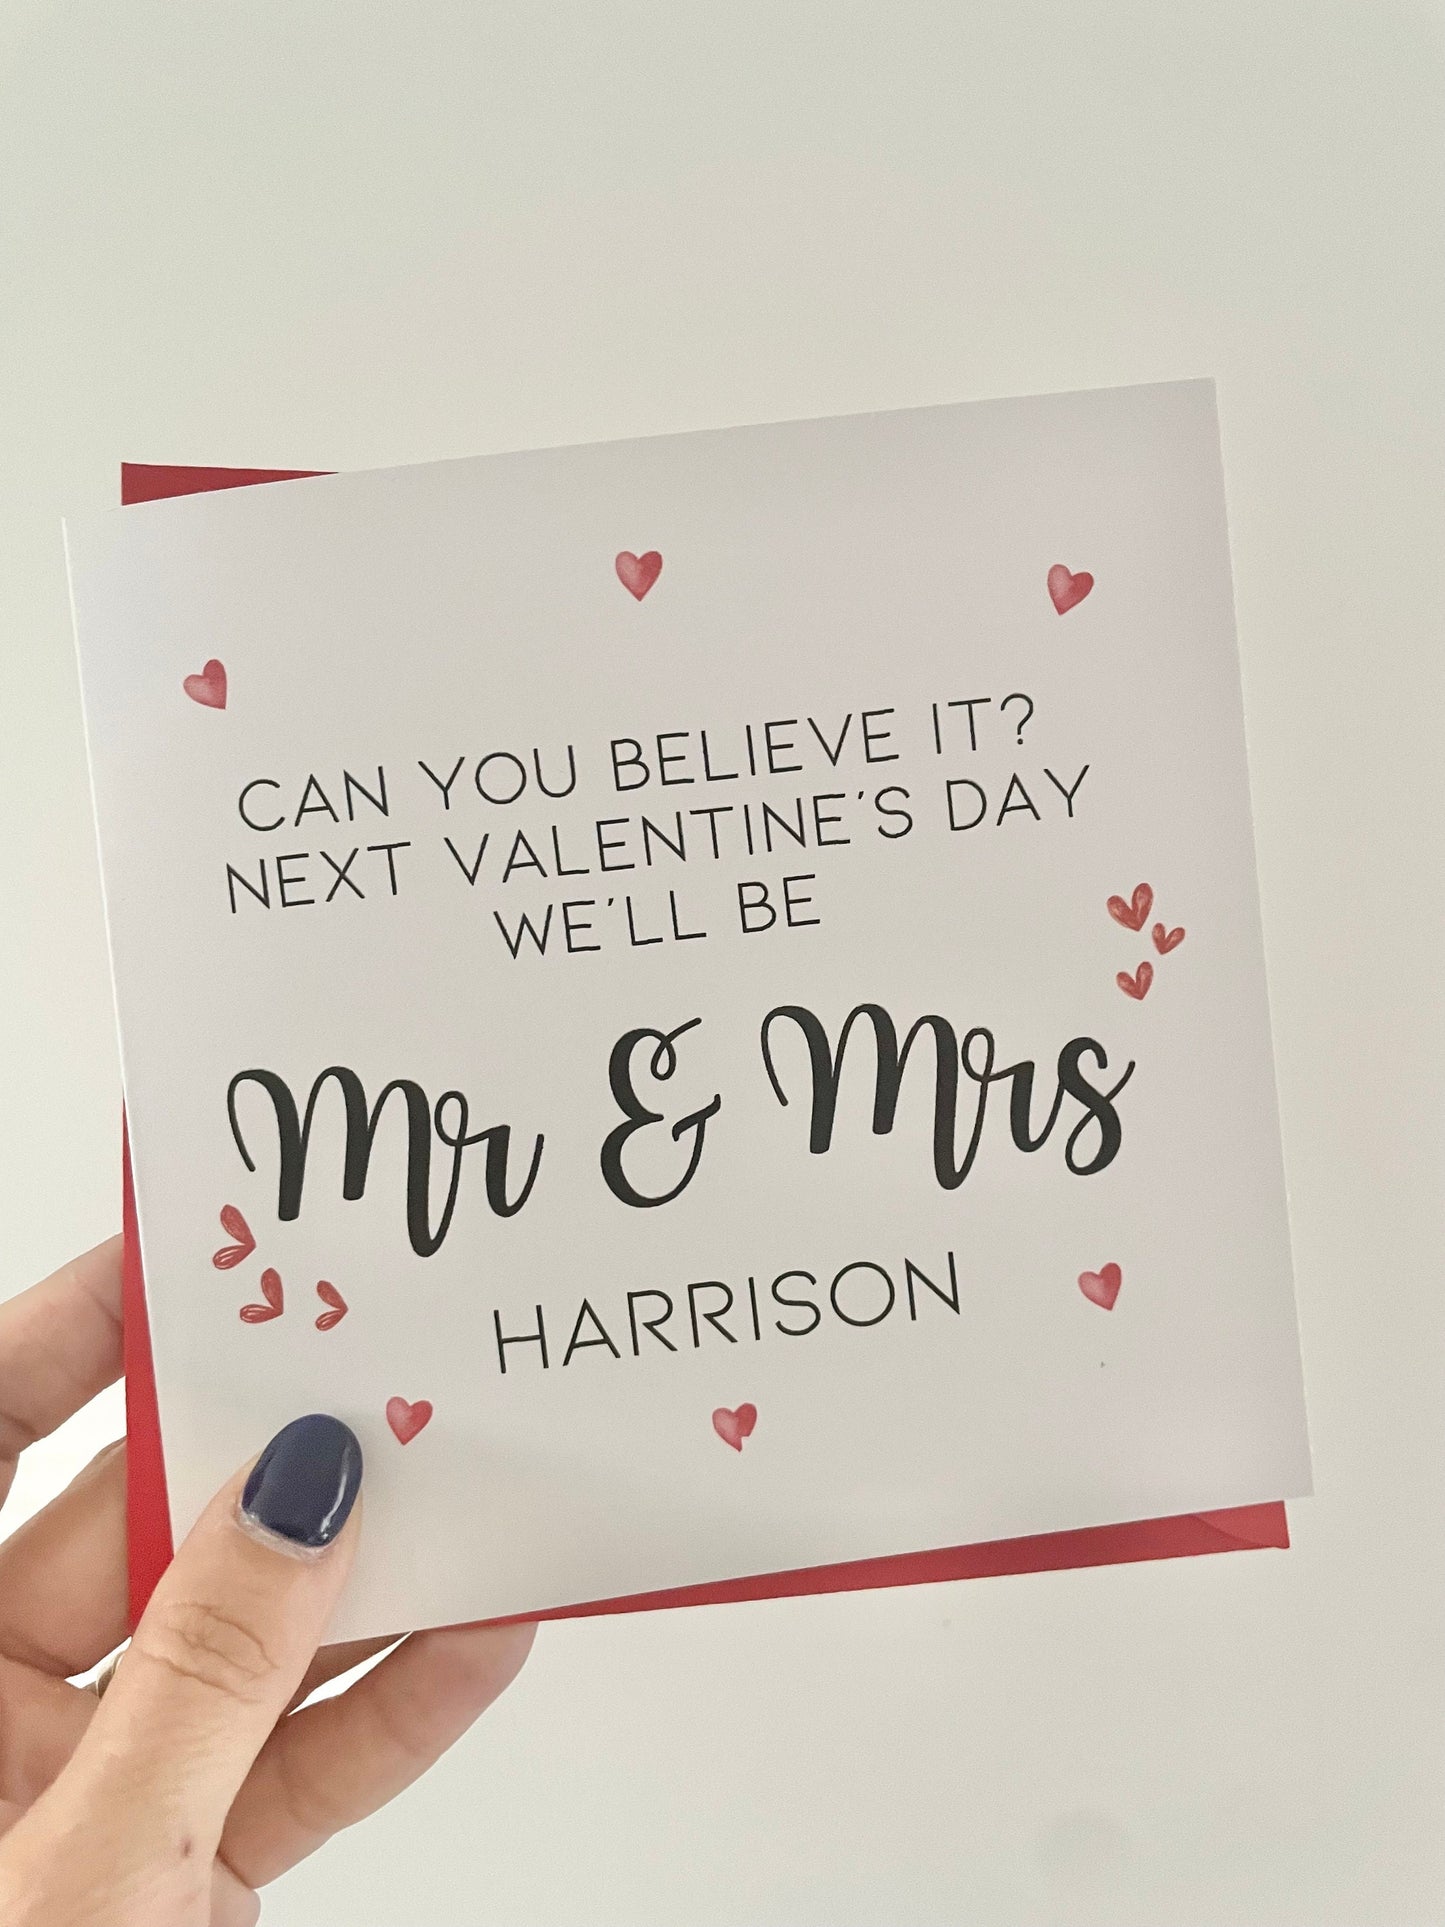 Next Valentines we will be Mr and Mrs, Valentine’s Day card for engaged couples marrying in 2024. Last valentines as mr and miss